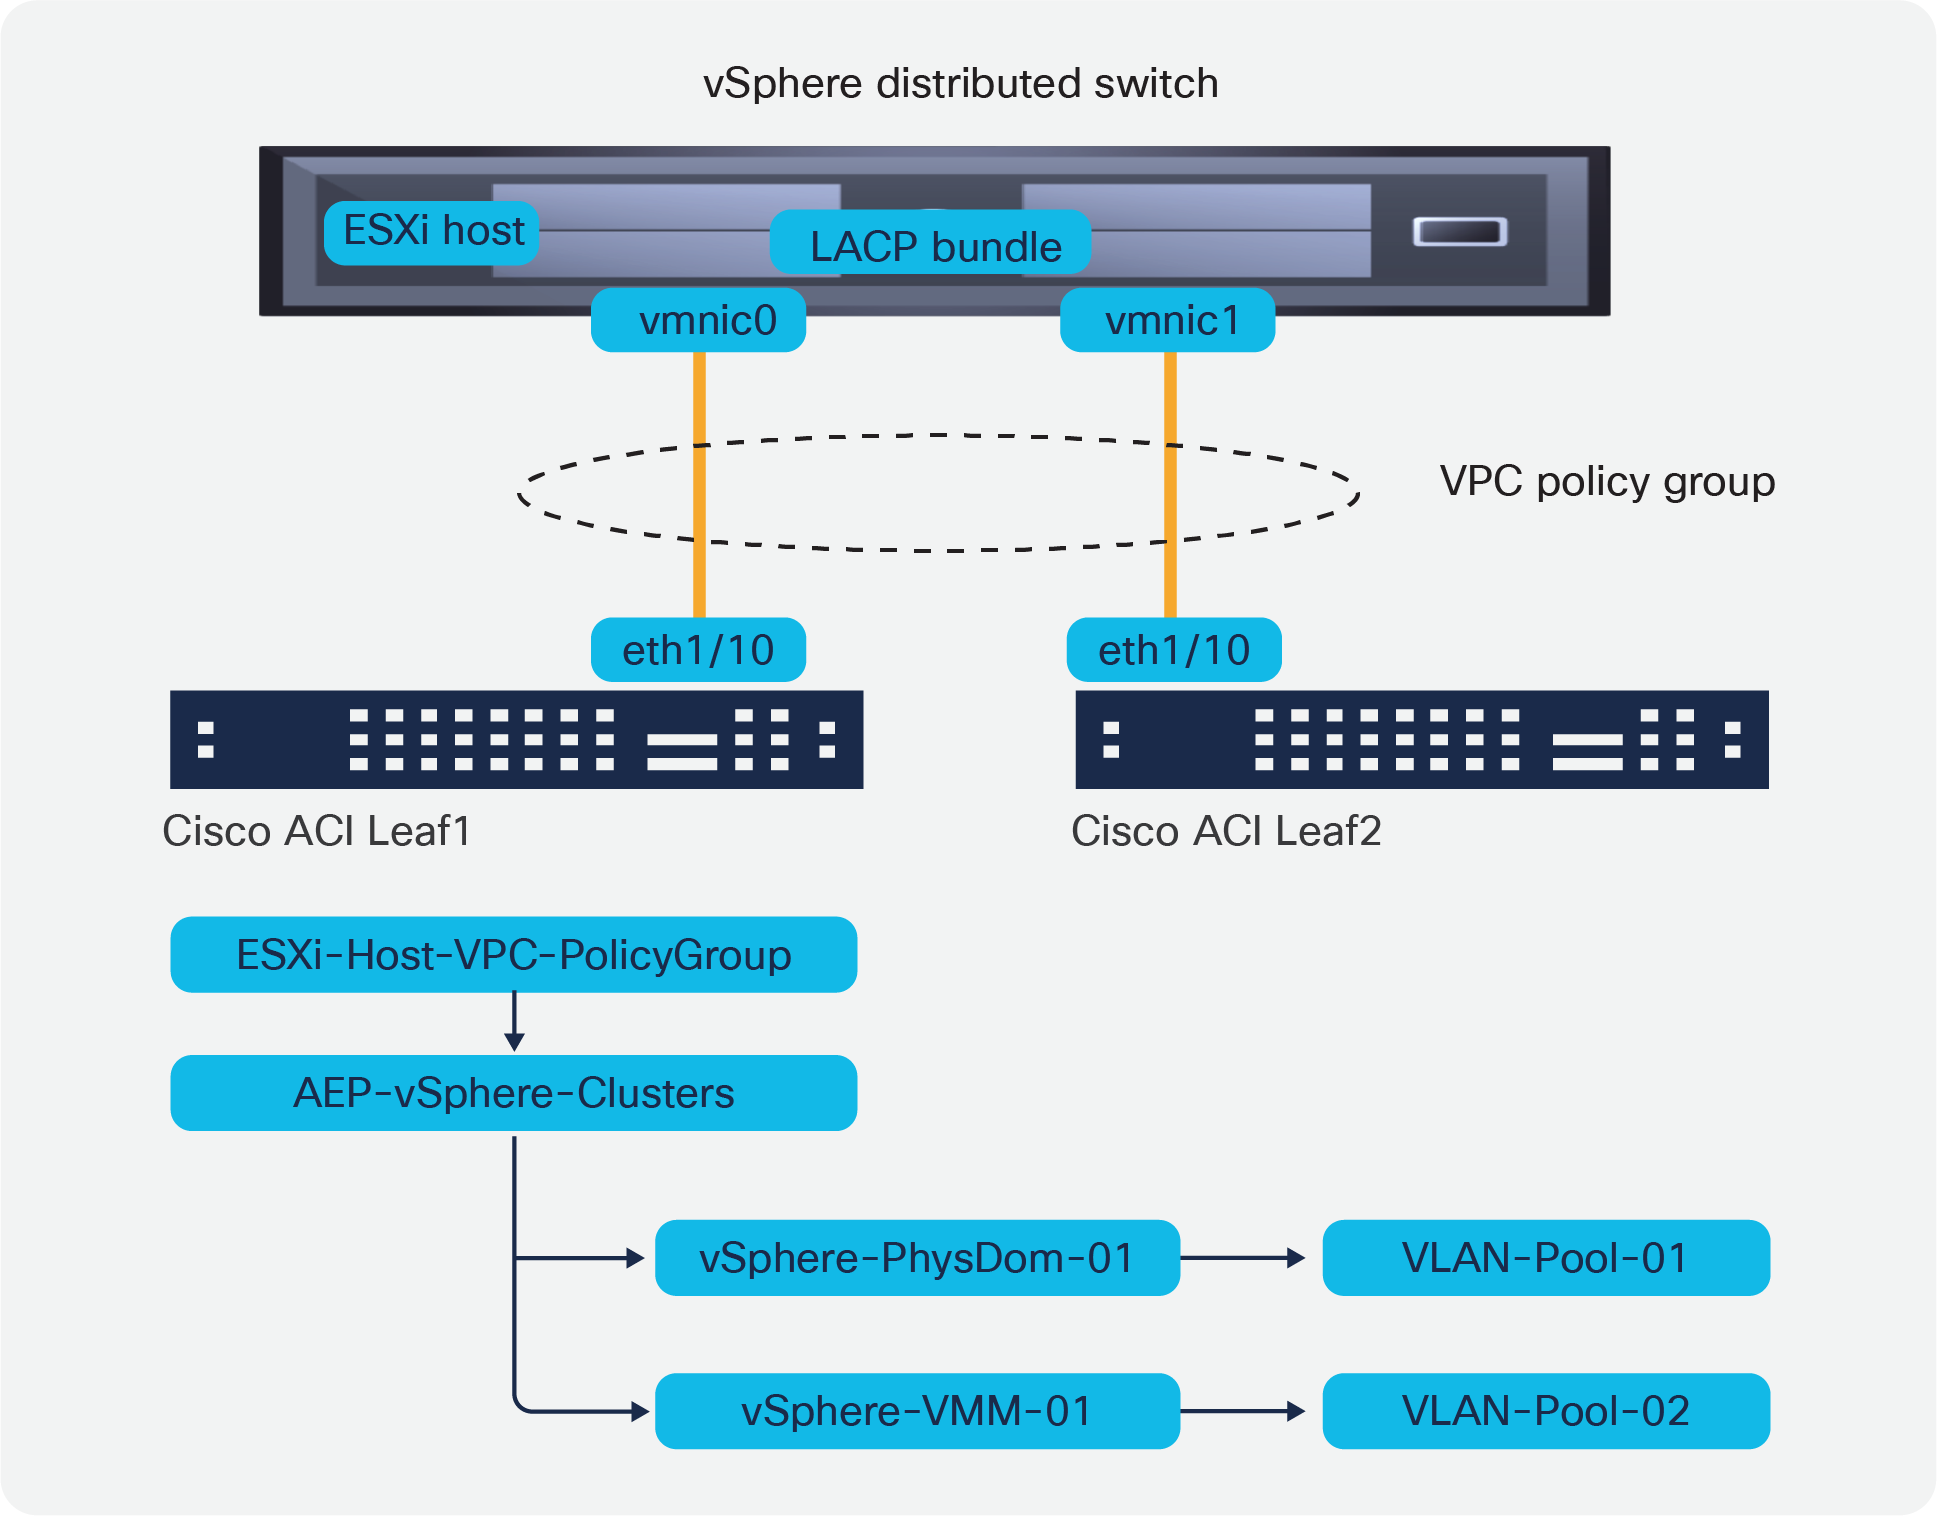 ESXi host connected using a VPC policy group